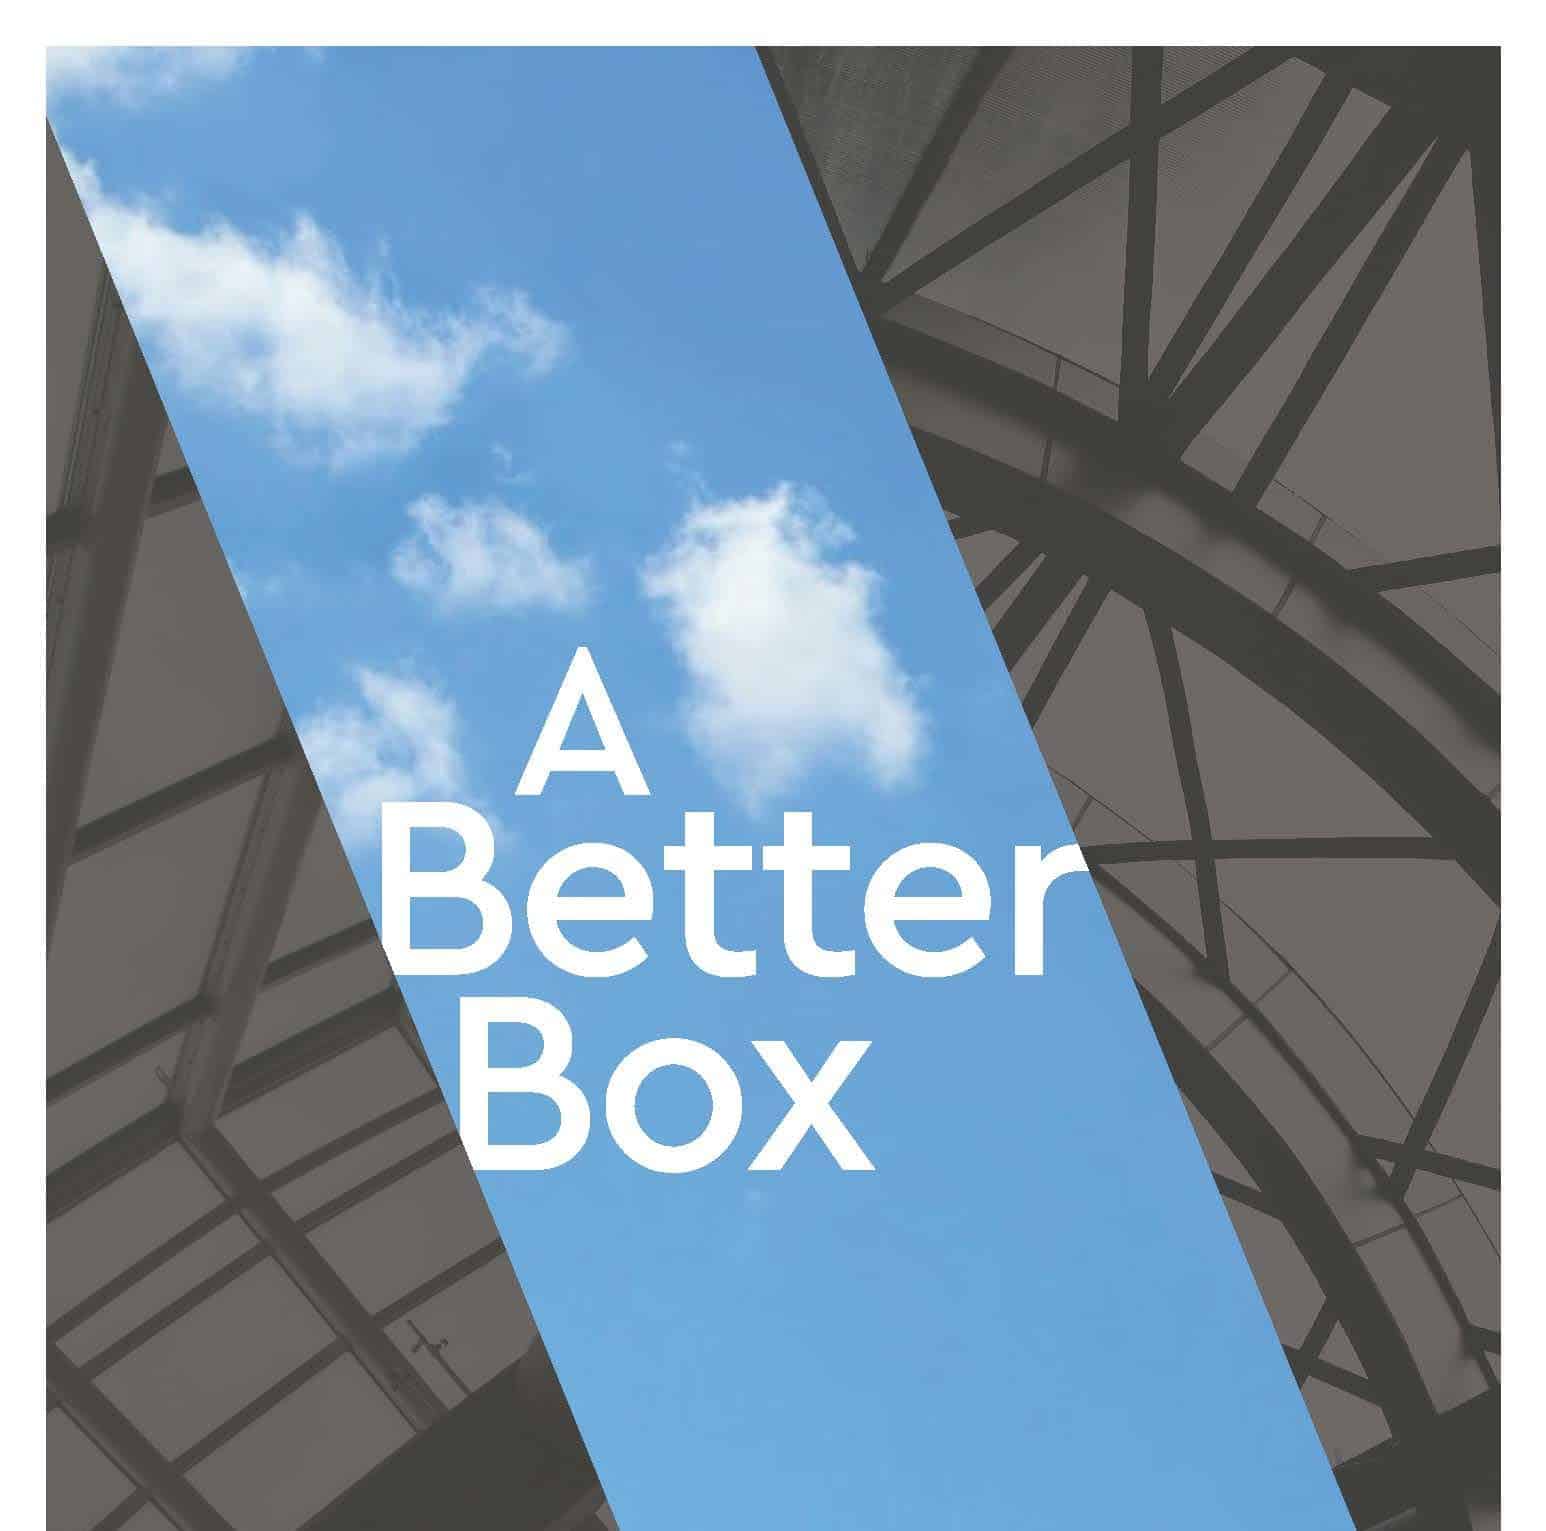 QuadReal and Fitwel release new report: “A Better Box”